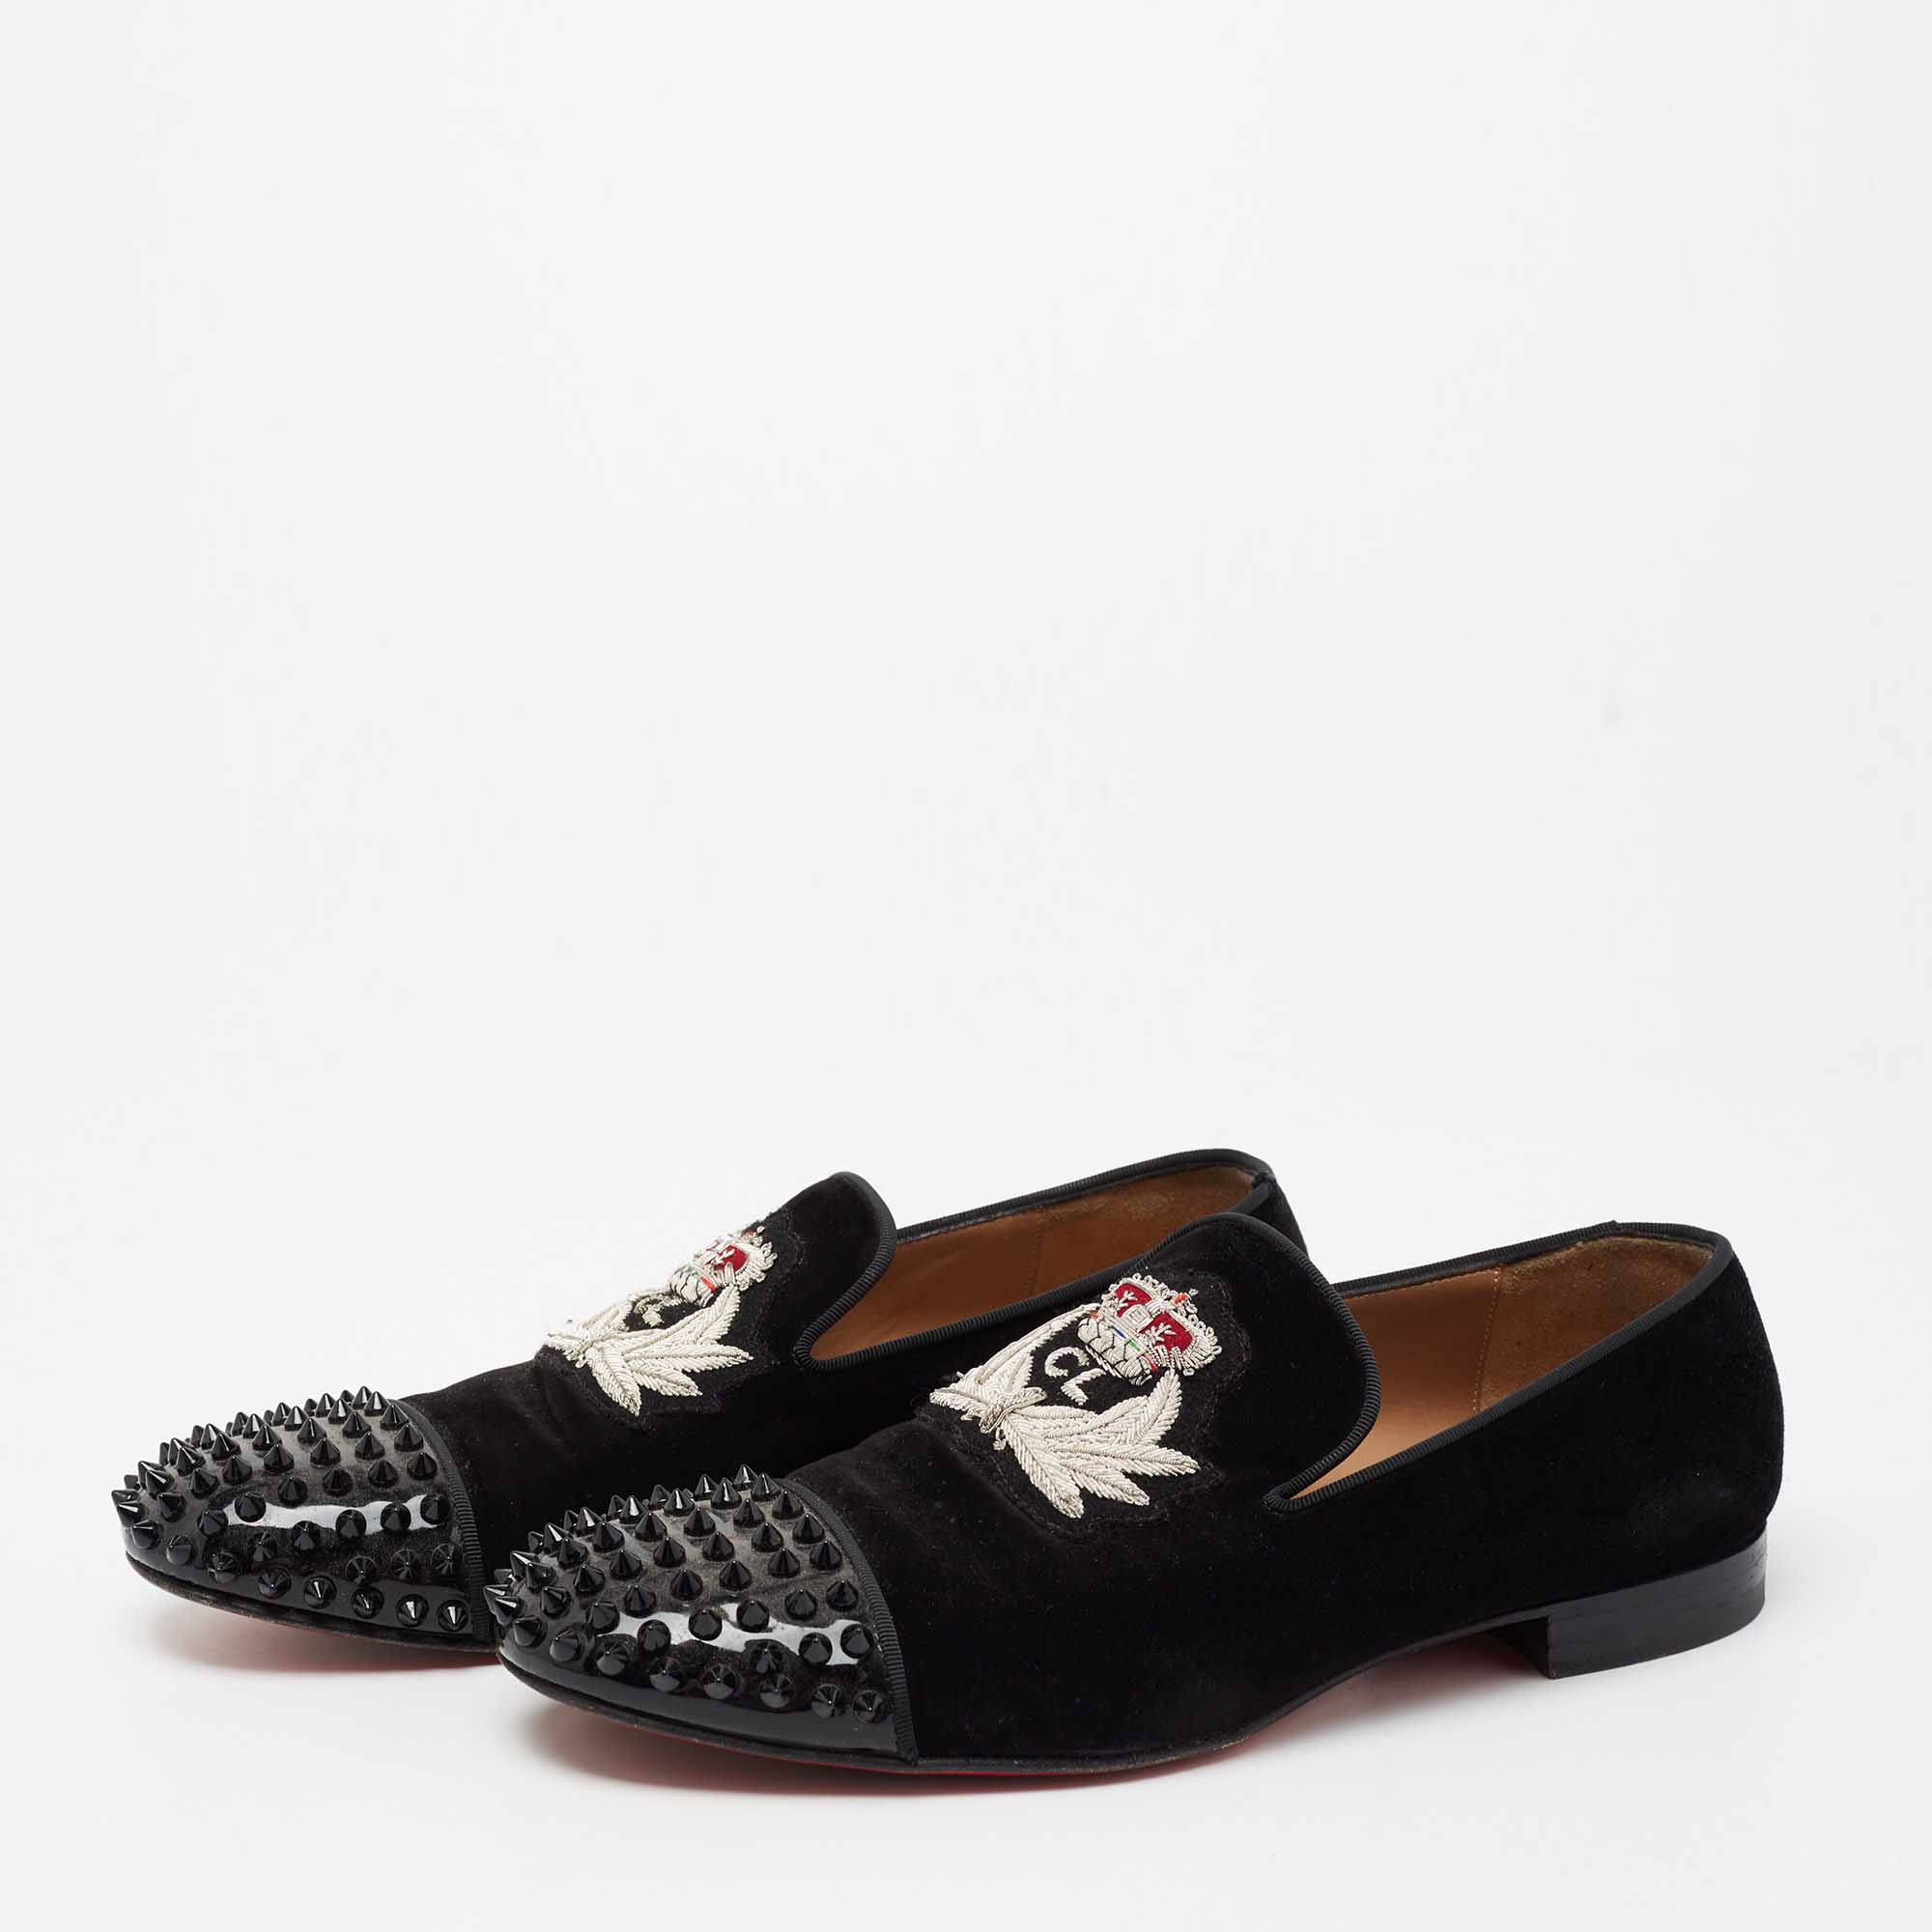 

Christian Louboutin Black Suede and Patent Leather Harvanana Spiked Smoking Slippers Size